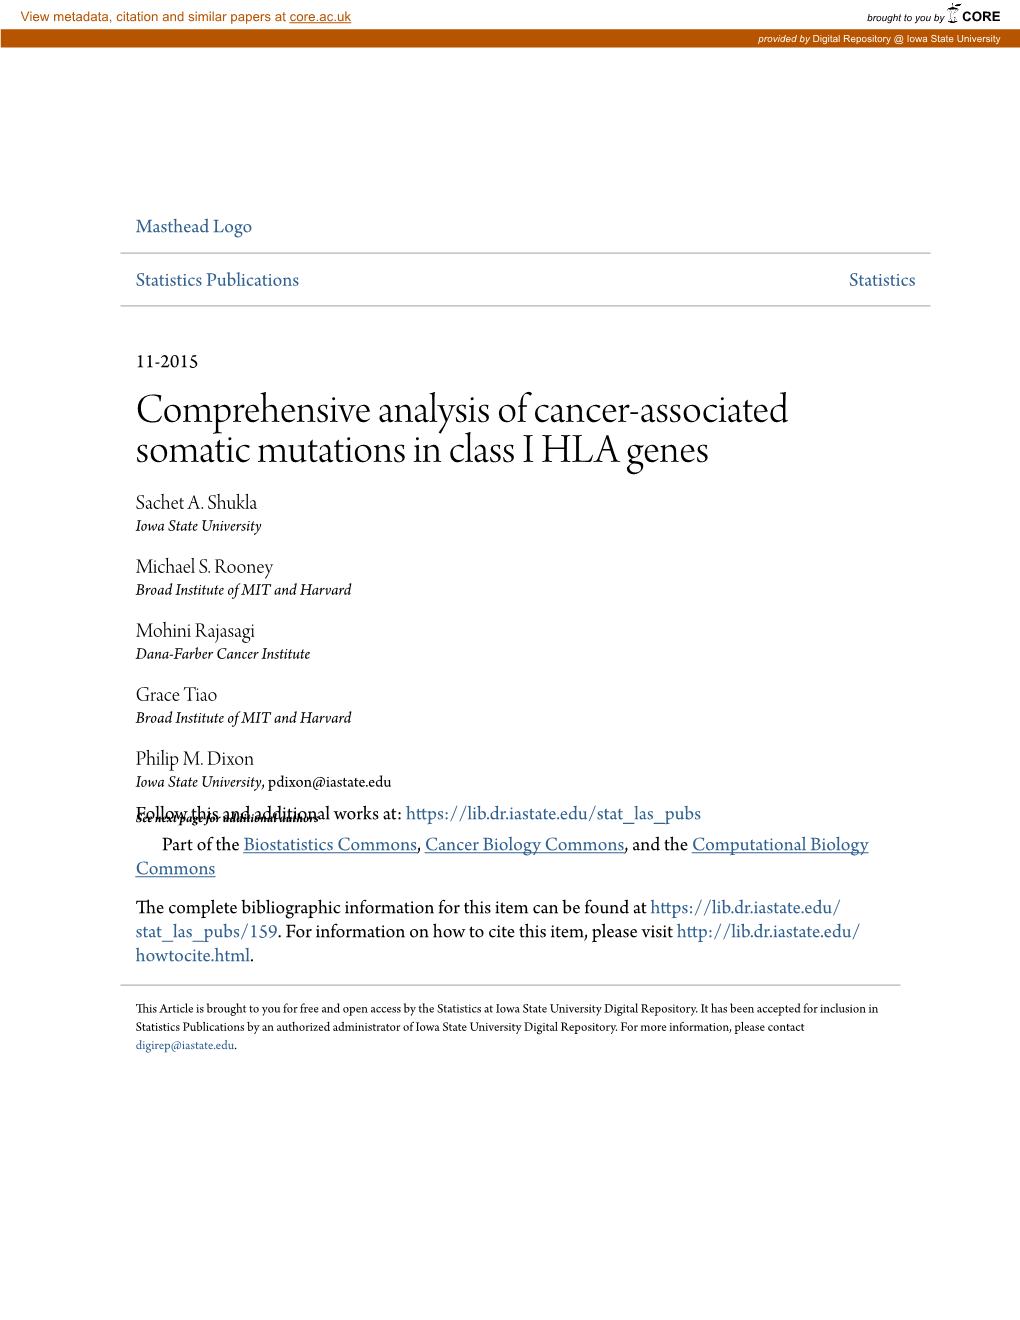 Comprehensive Analysis of Cancer-Associated Somatic Mutations in Class I HLA Genes Sachet A